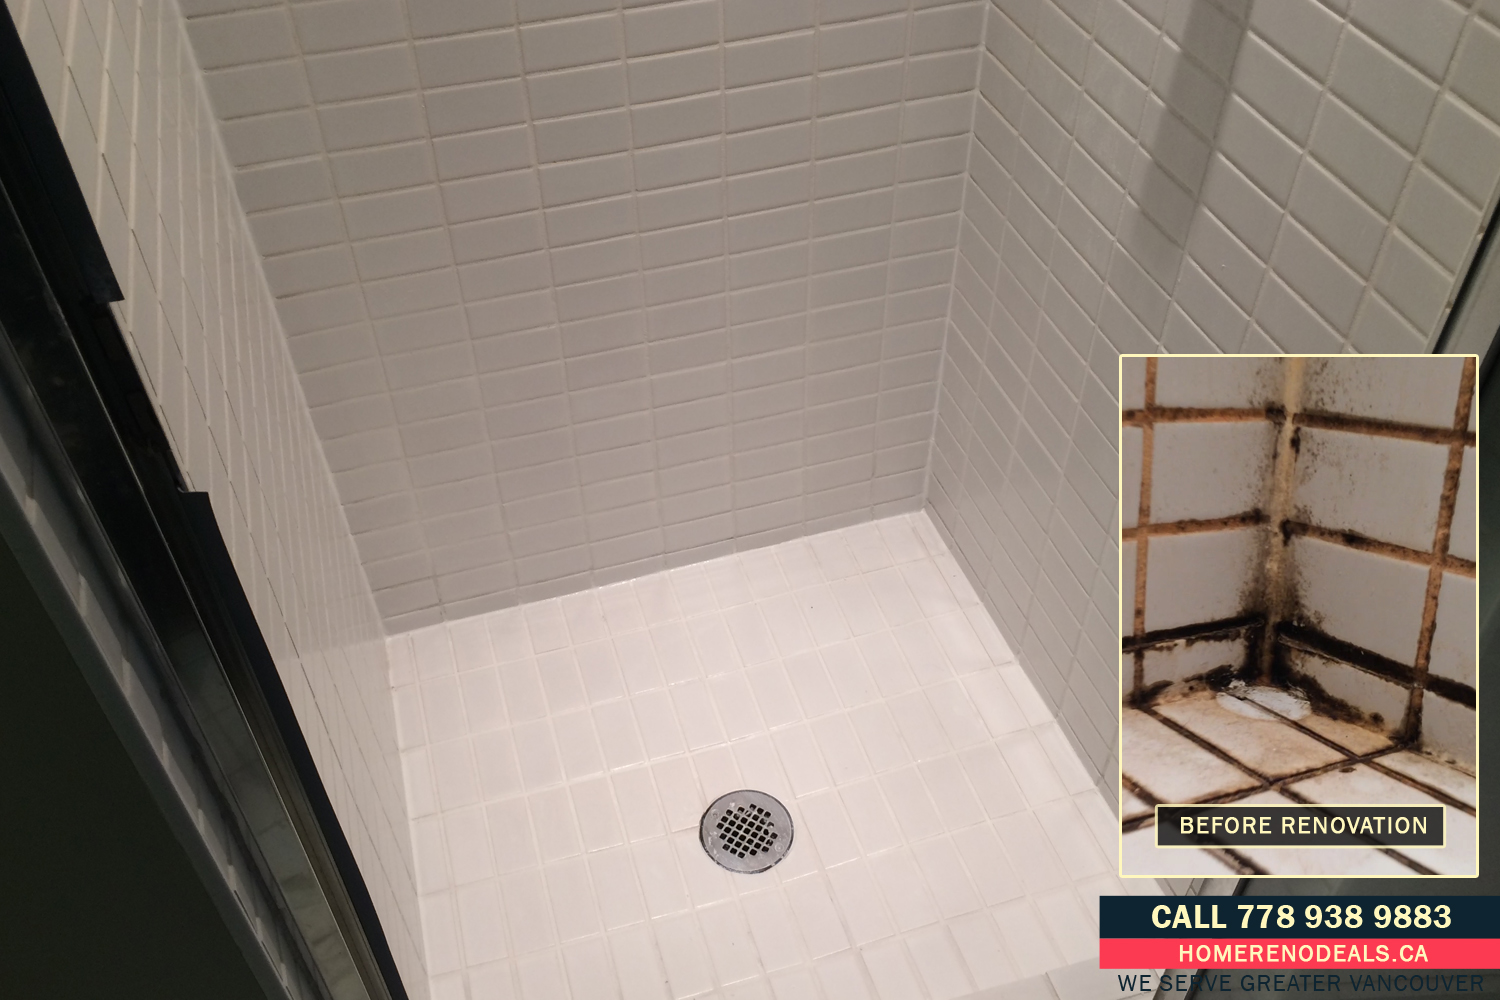 Shower Tile Regrouting Service Near Me. Home Renovation Deals in Greater Vancouver, BC